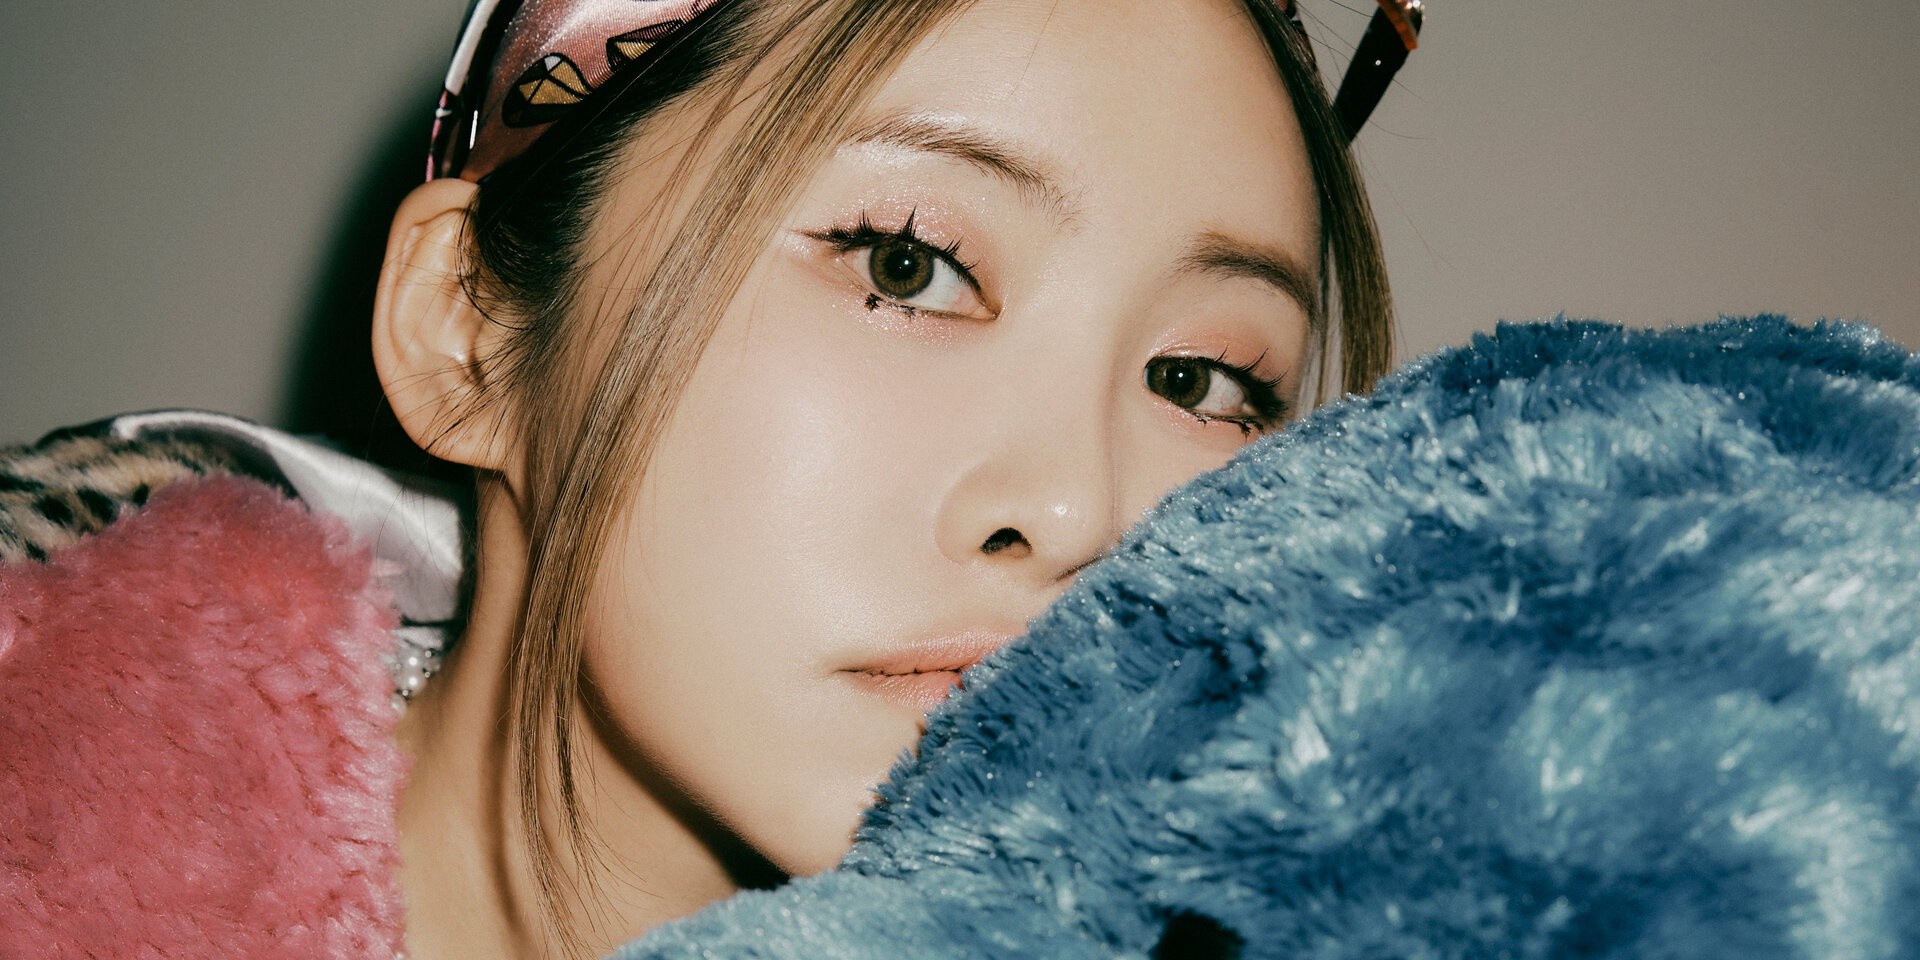 Asia Spotlight: Korean singer-songwriter SURAN on creating a fantasy world through music and starting her own record label